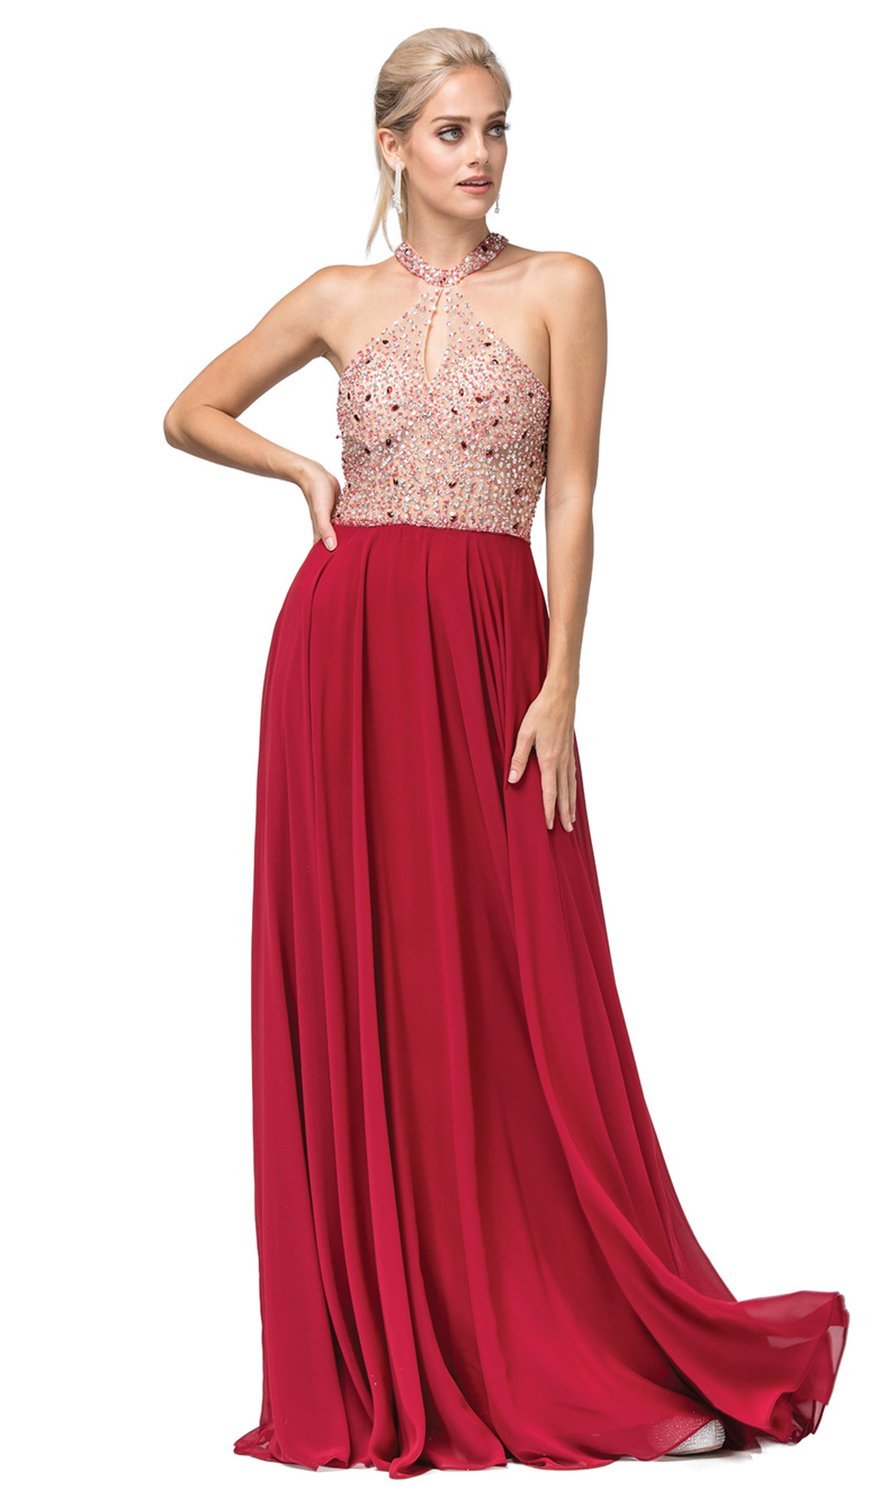 Dancing Queen - 2838 Beaded Keyhole Cutout Halter Long Dress In Red